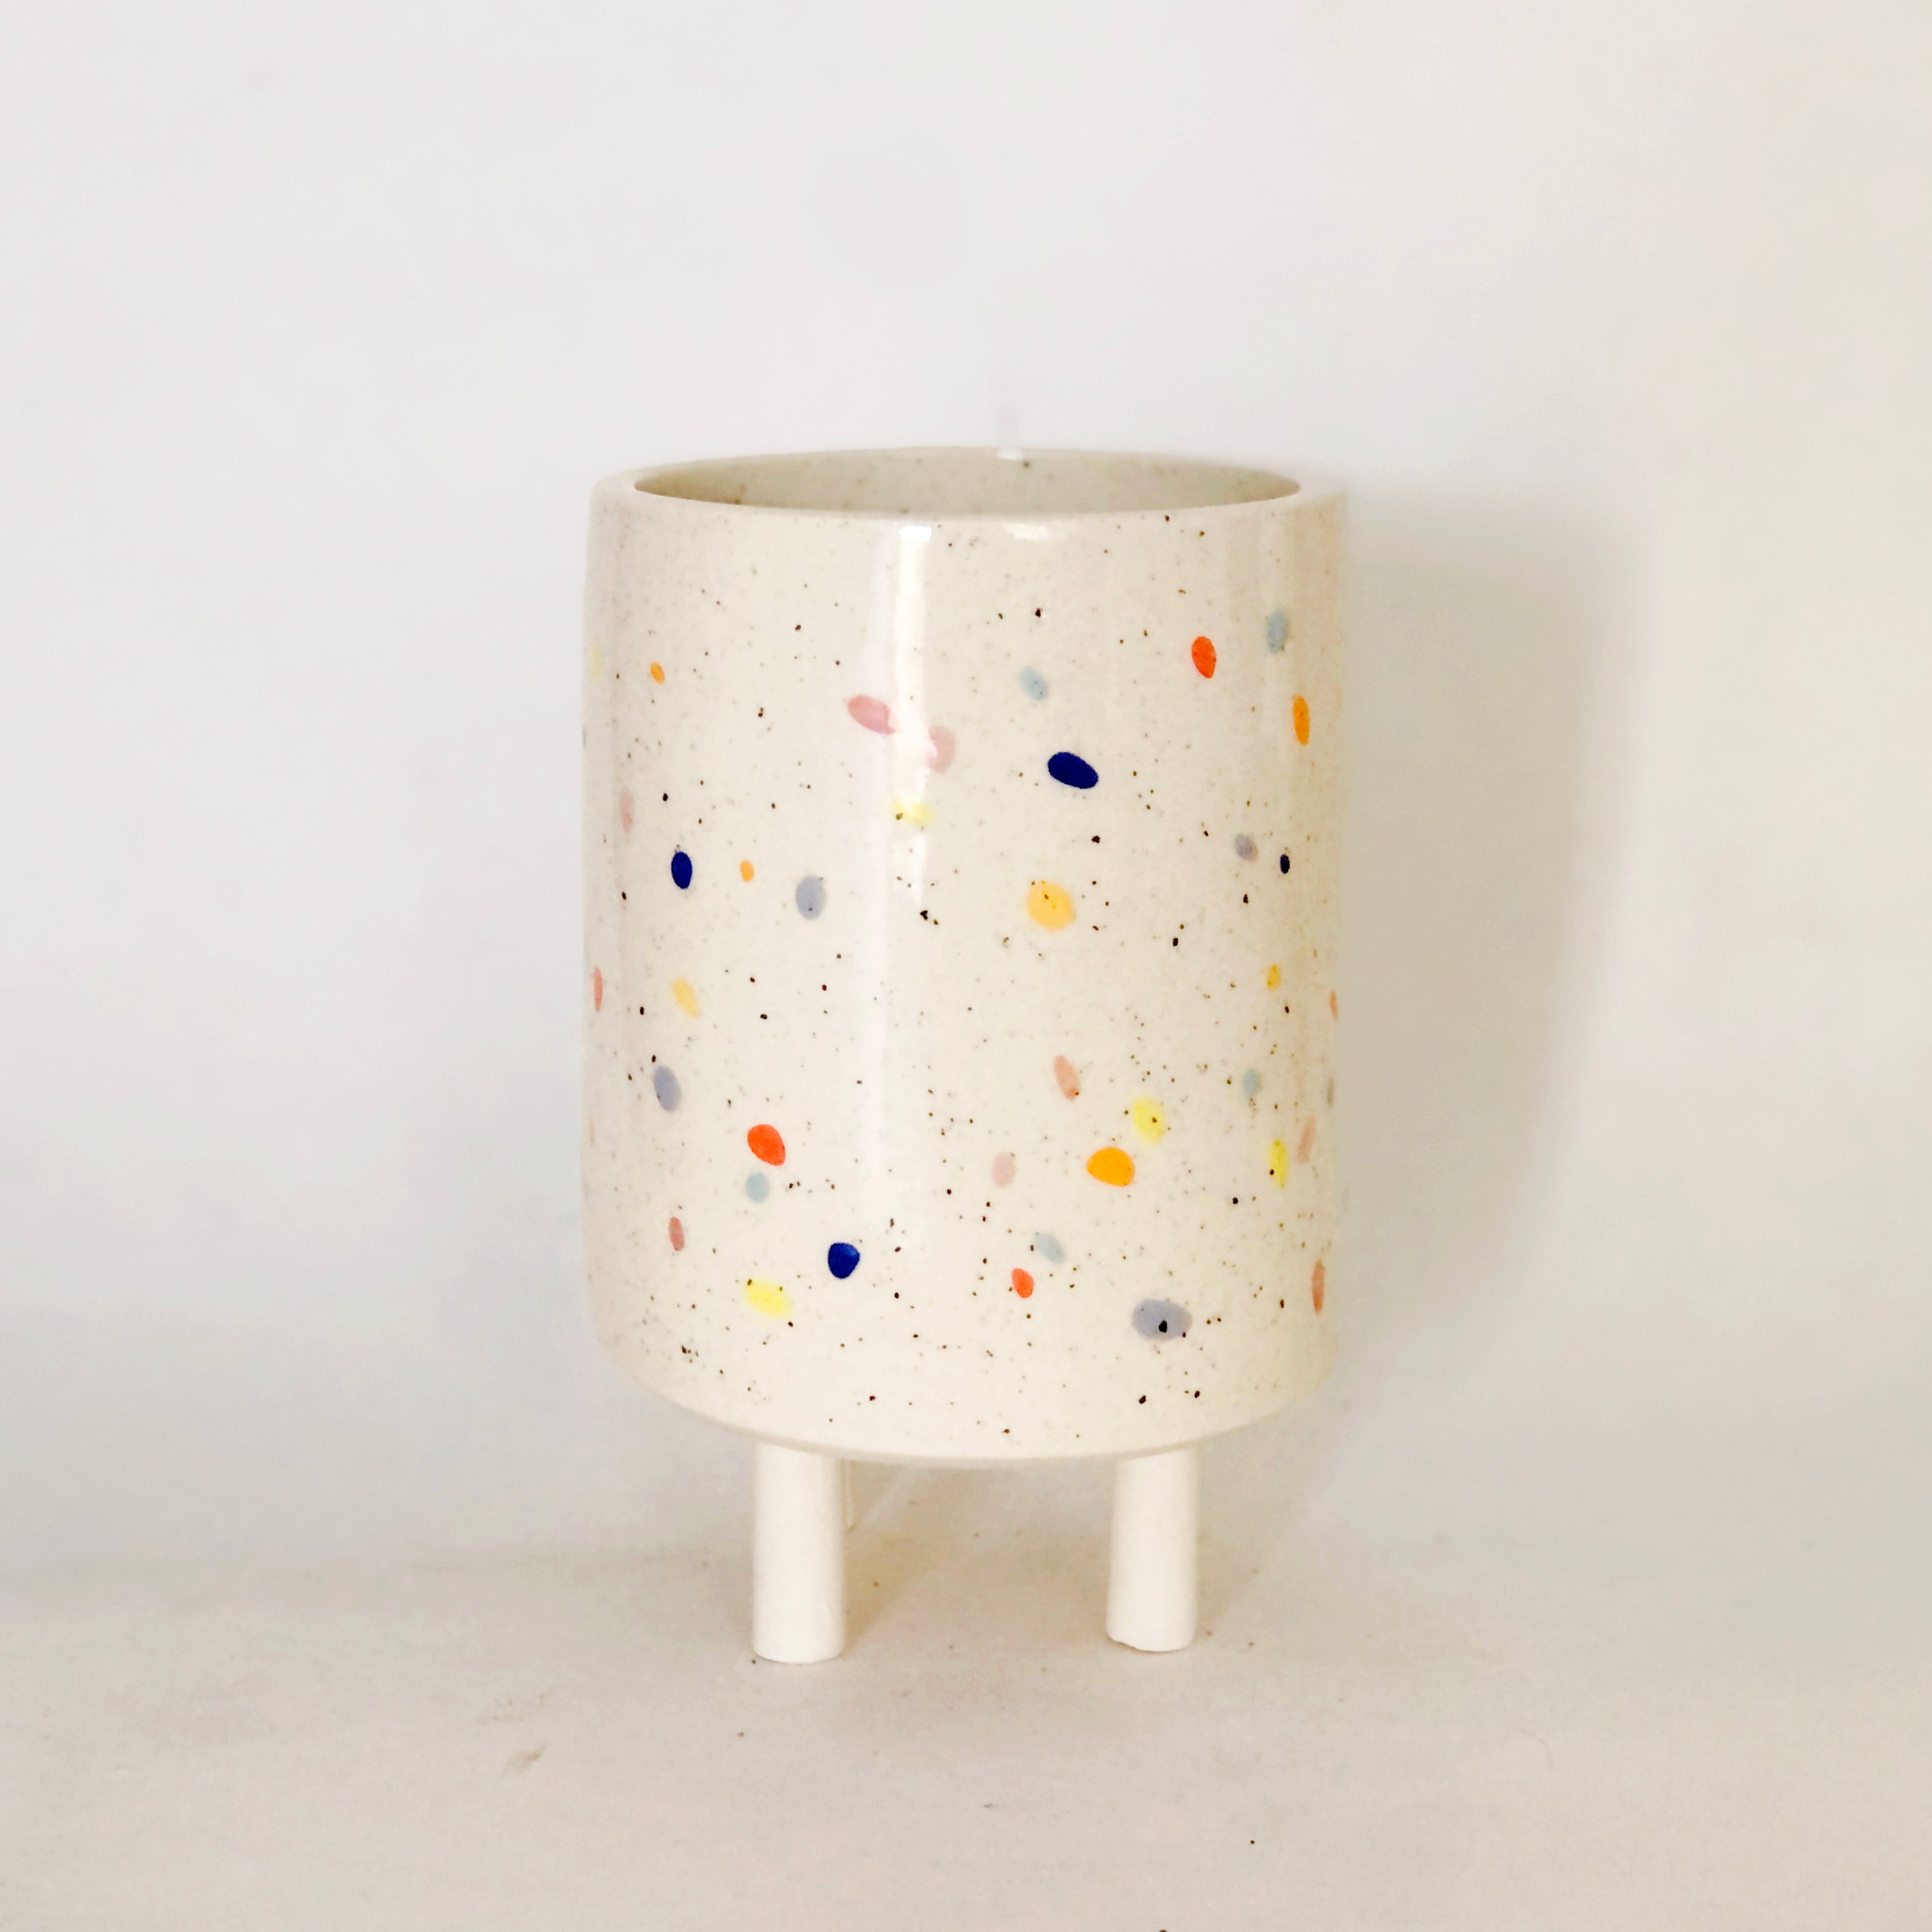 Double Sprinkles Planter with Legs